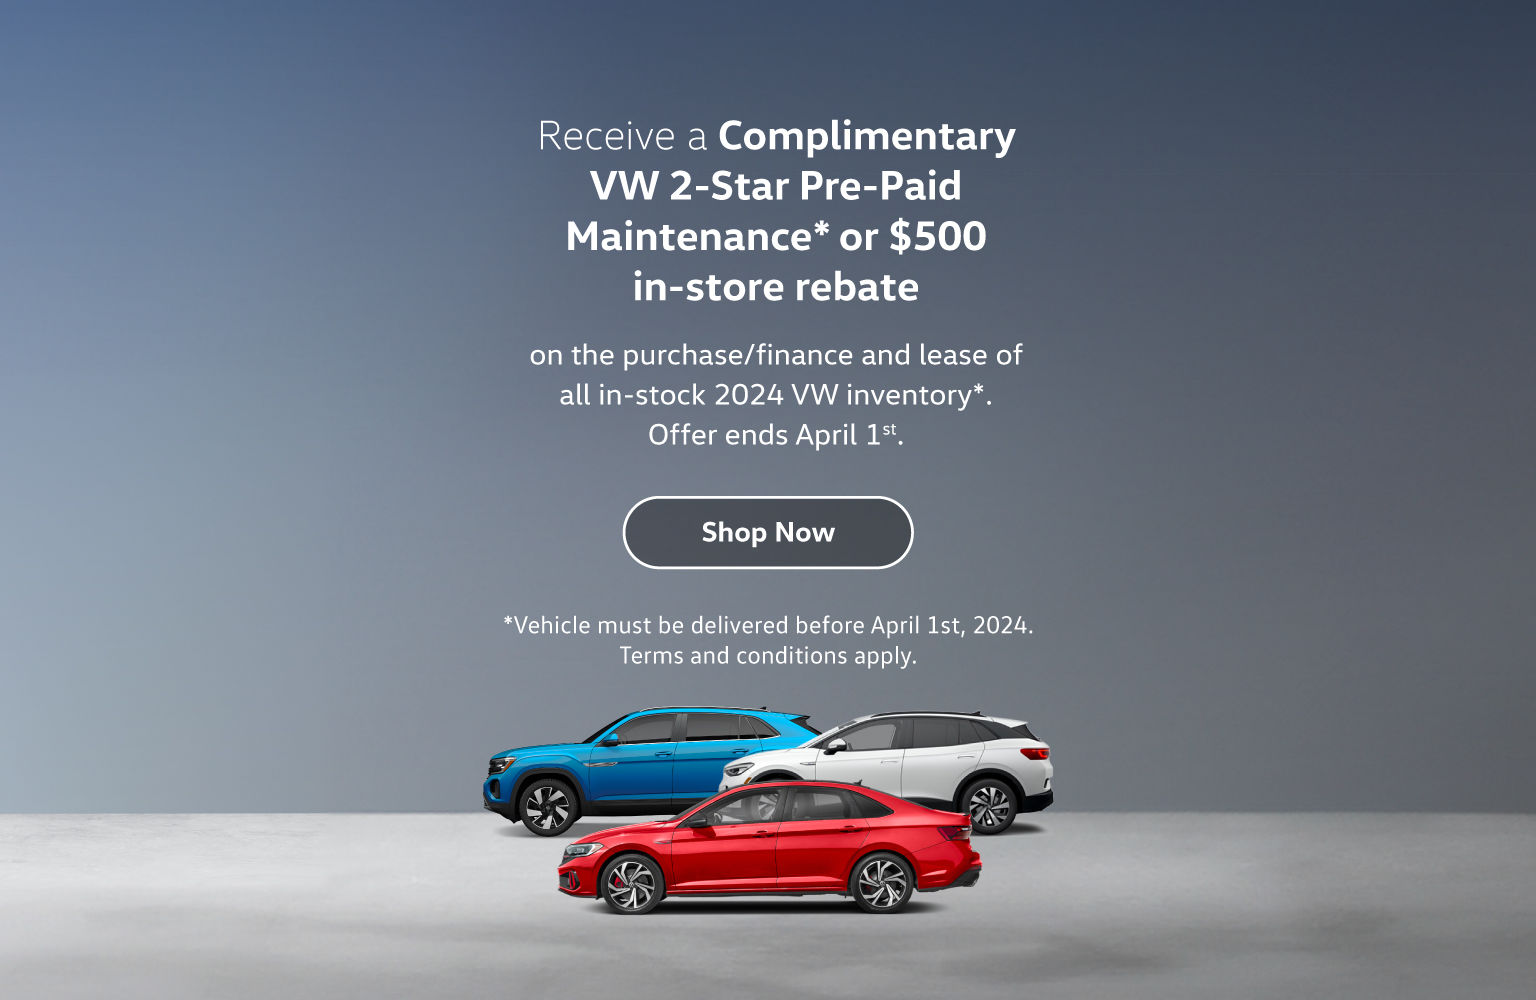 HVW - Complimentary VW 2 star Promo - Home Page